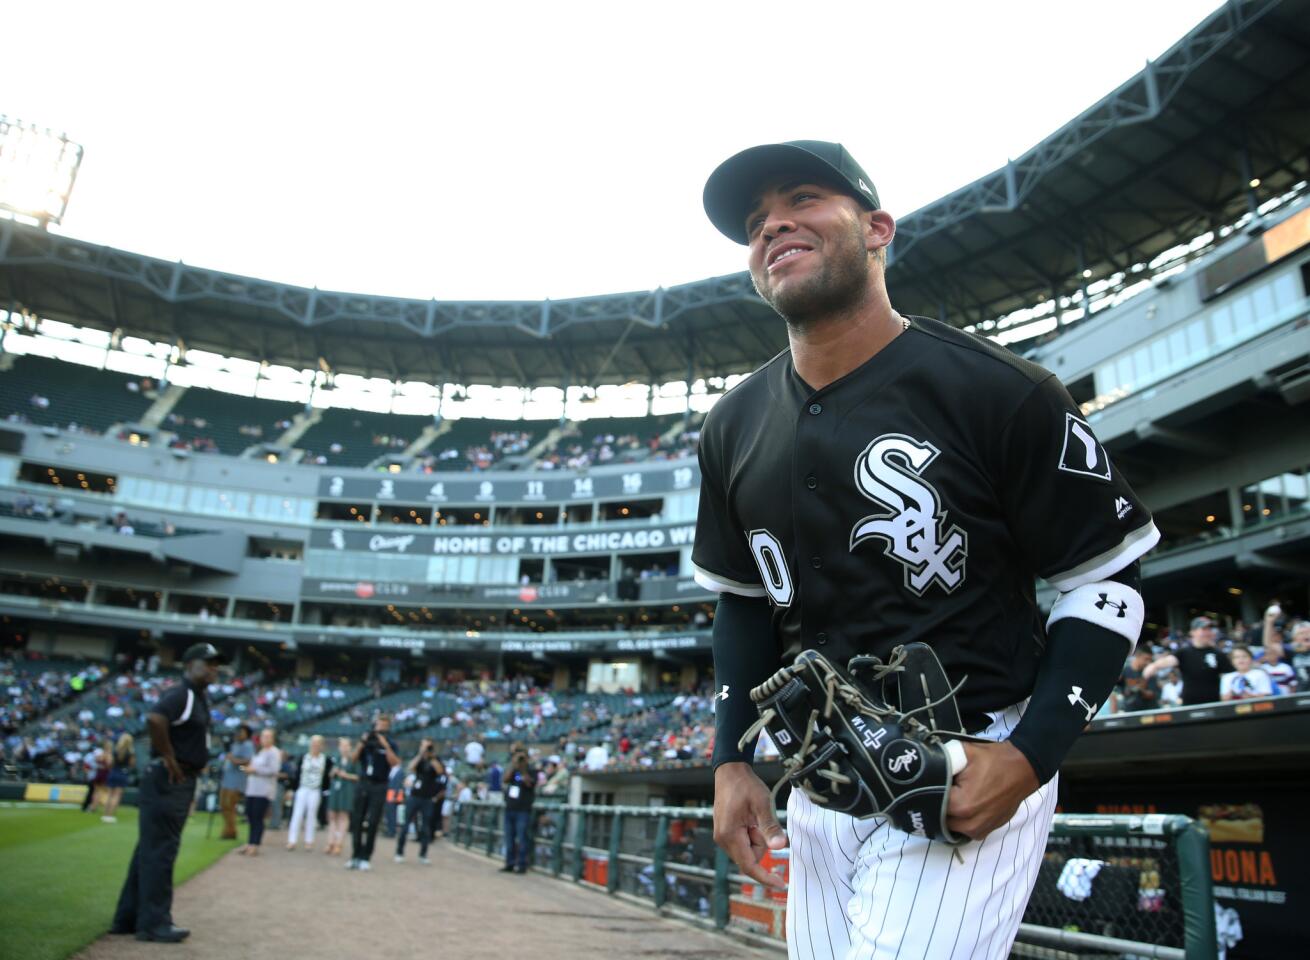 White Sox second baseman Yoan Moncada exits the dugout to warm up before a game against the Los Angeles Dodgers at Guaranteed Rate Field on July 19, 2017.